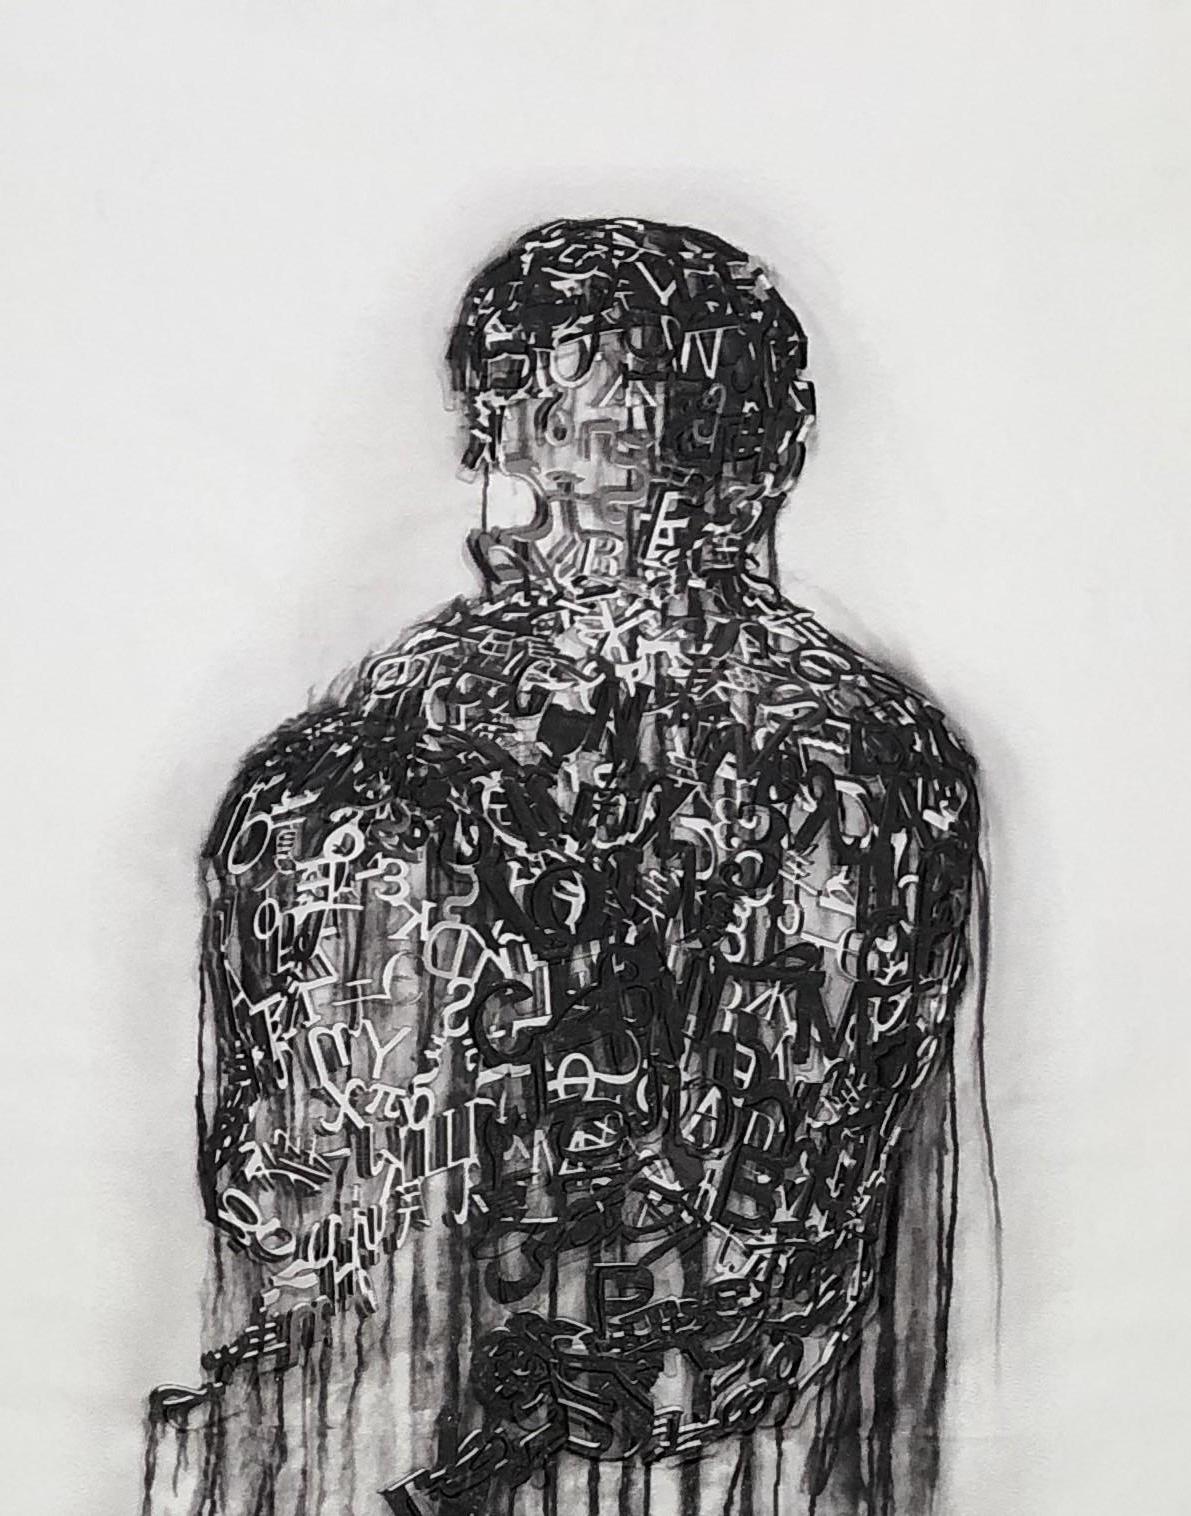 Nomade - Original Lithograph Handsigned Numbered - Gray Interior Print by Jaume Plensa